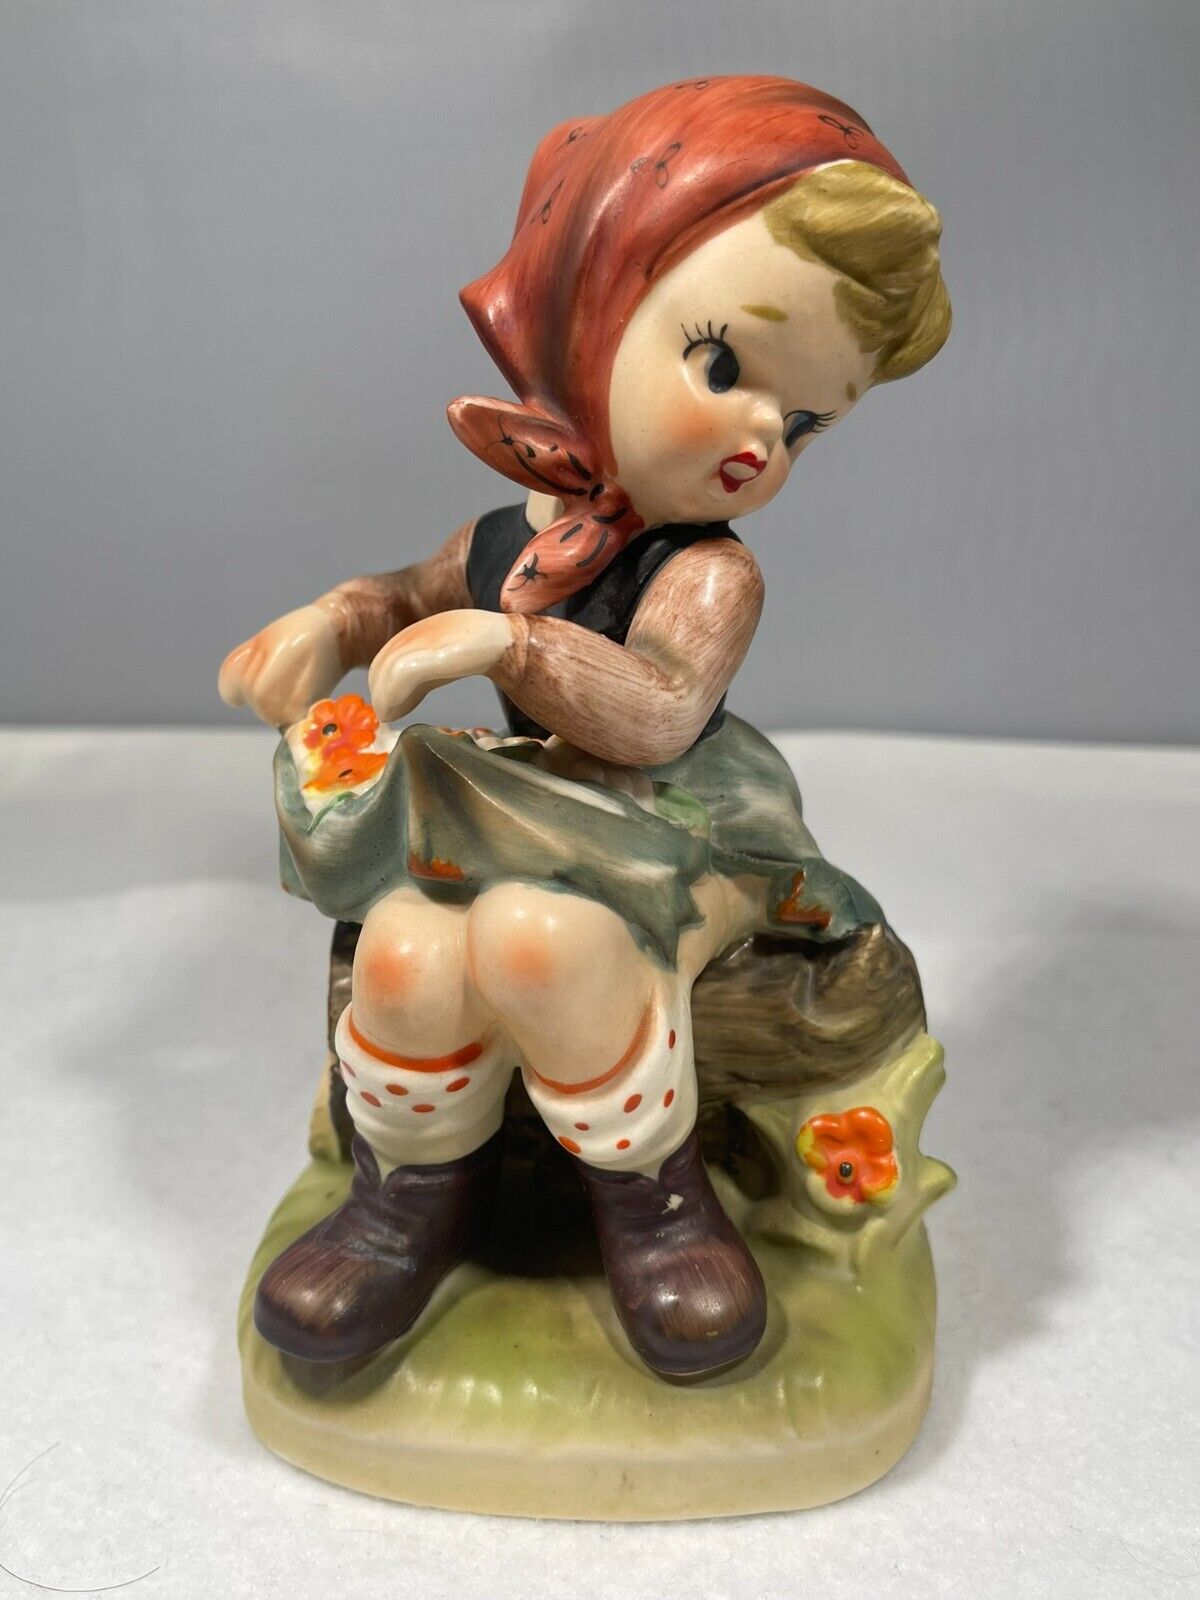 NAPCOWARE Vintage Ceramic Figurine #C7363 Japan Young Girl with Flowers